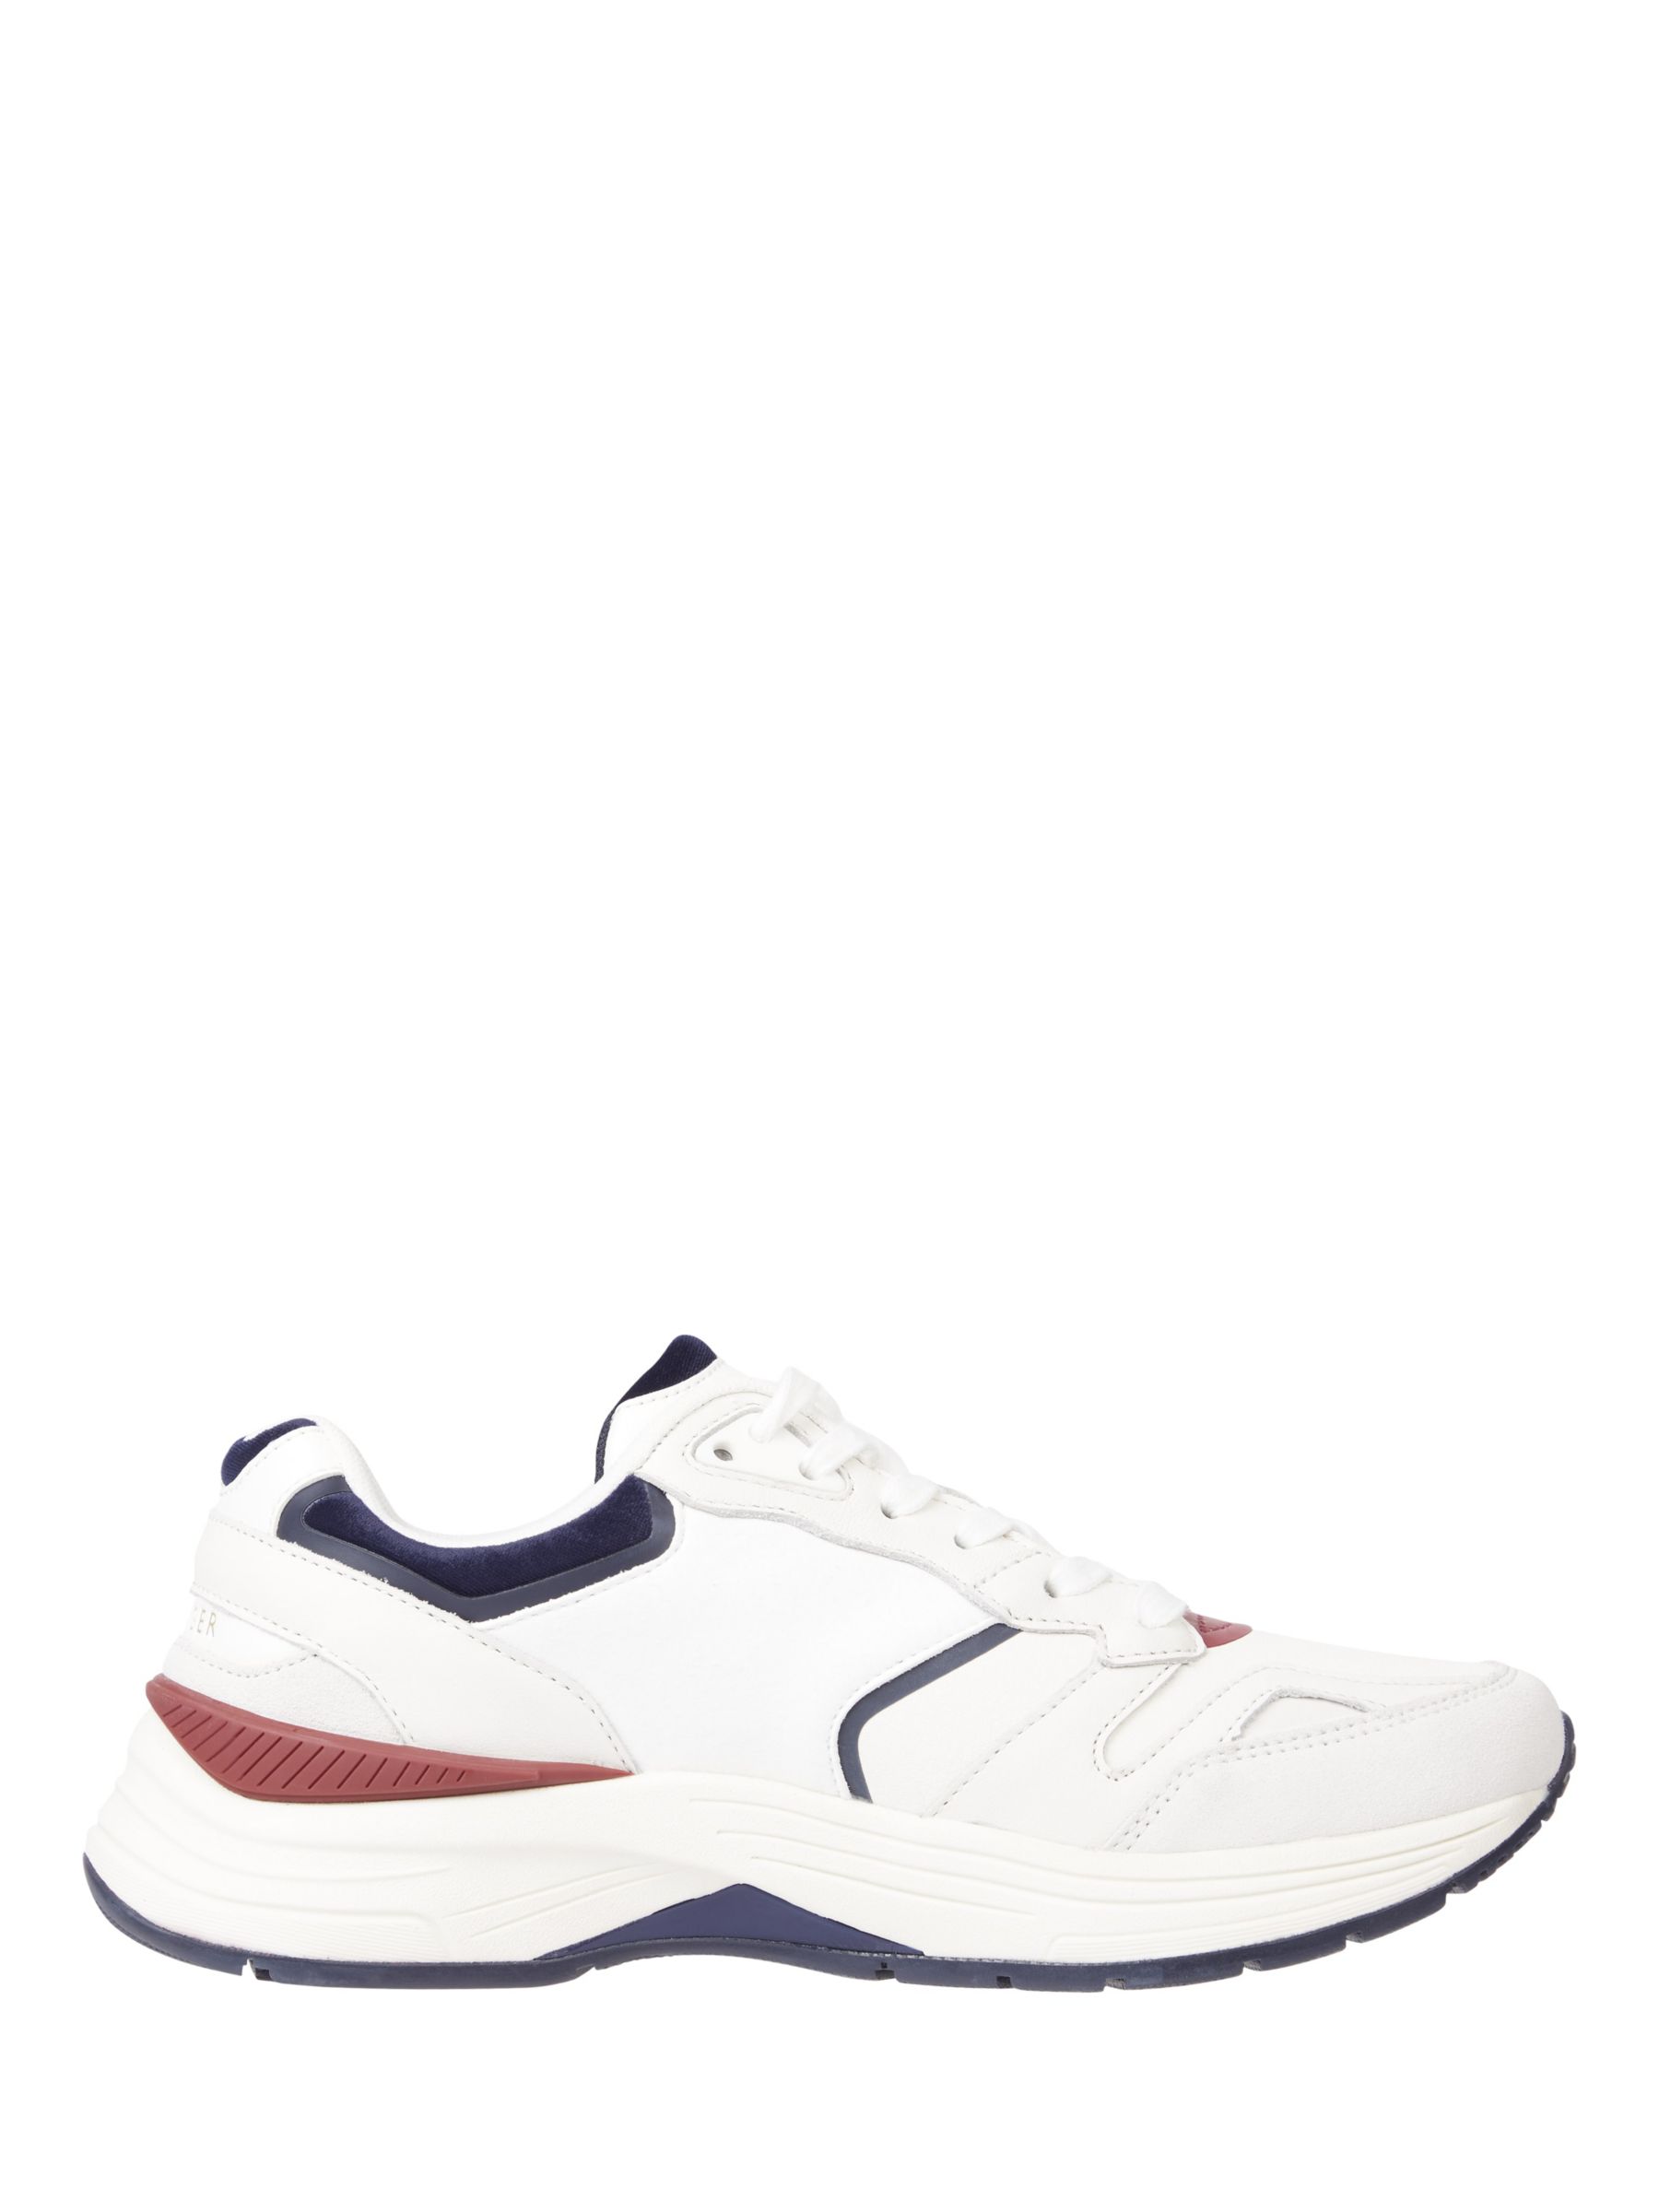 Tommy Hilfiger Leather Preppy Trainers, White at John Lewis & Partners